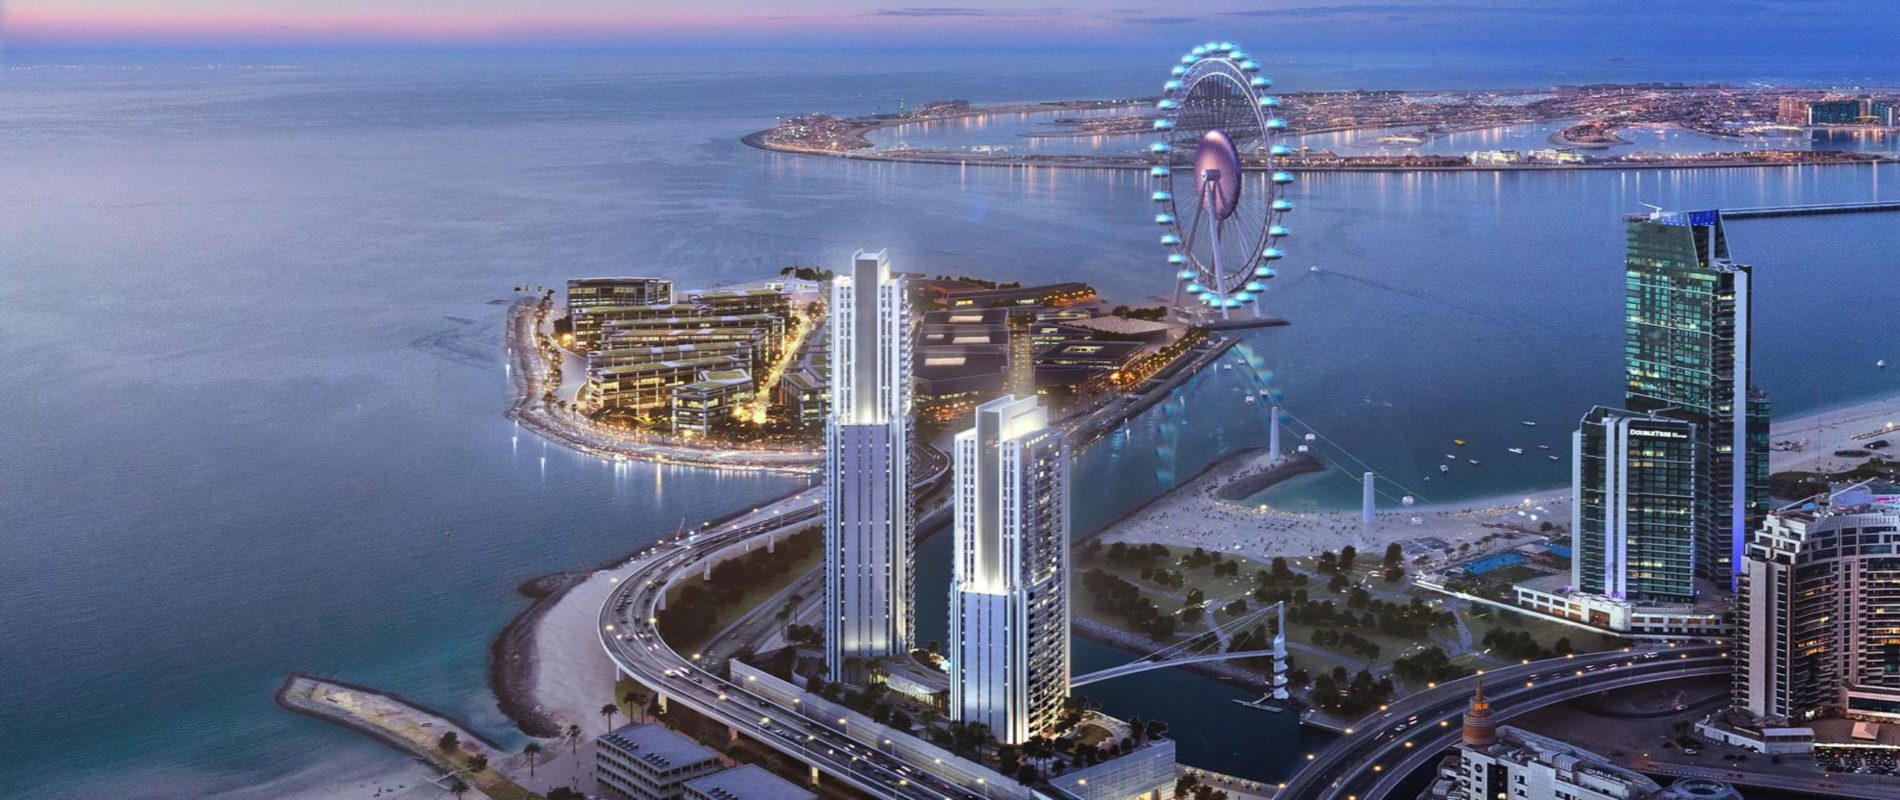 52-42 (Fifty Two Forty Two Tower) Apartments - Dubai Marina.